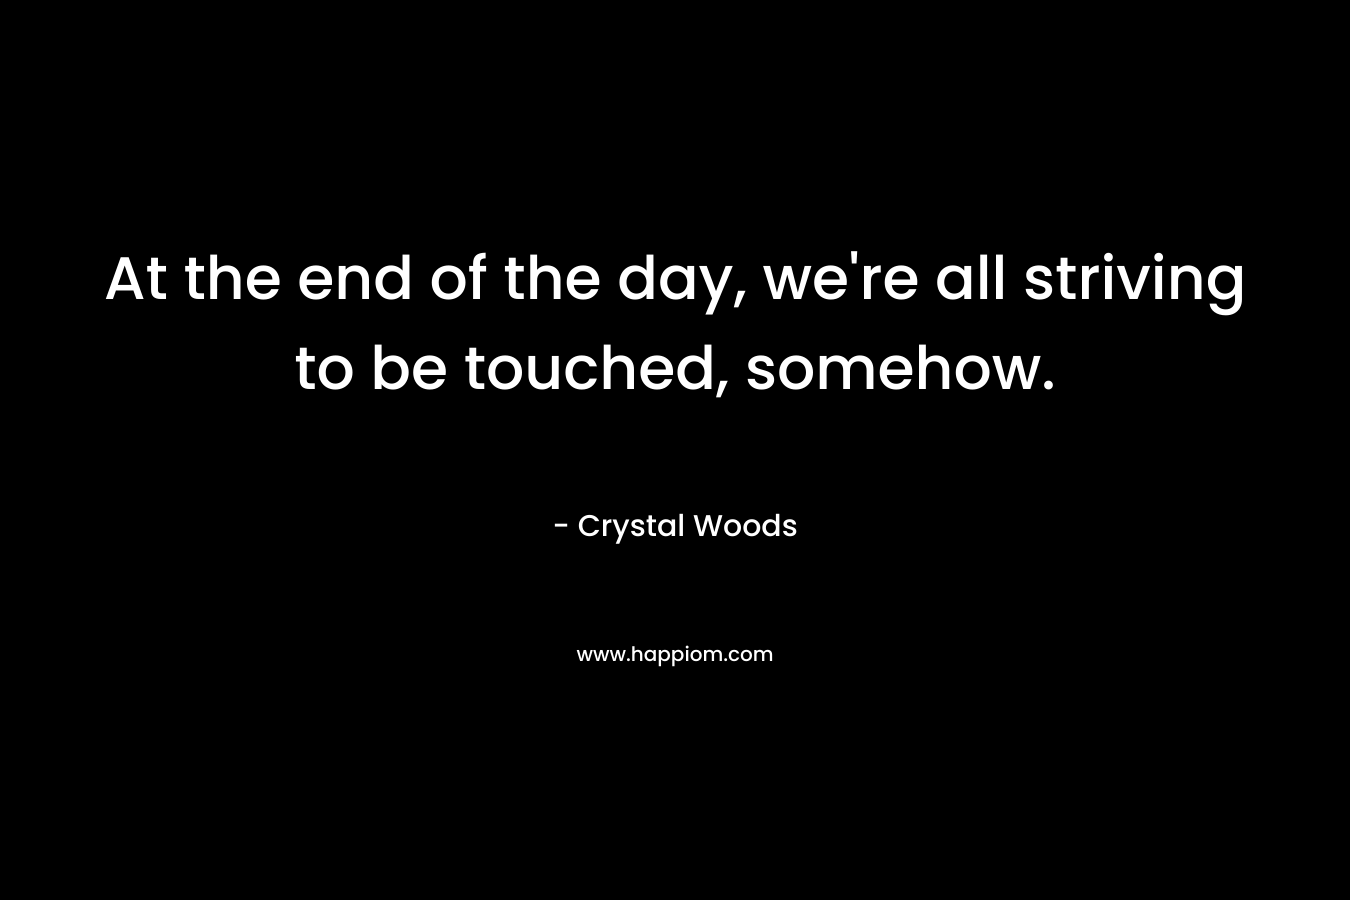 At the end of the day, we're all striving to be touched, somehow.